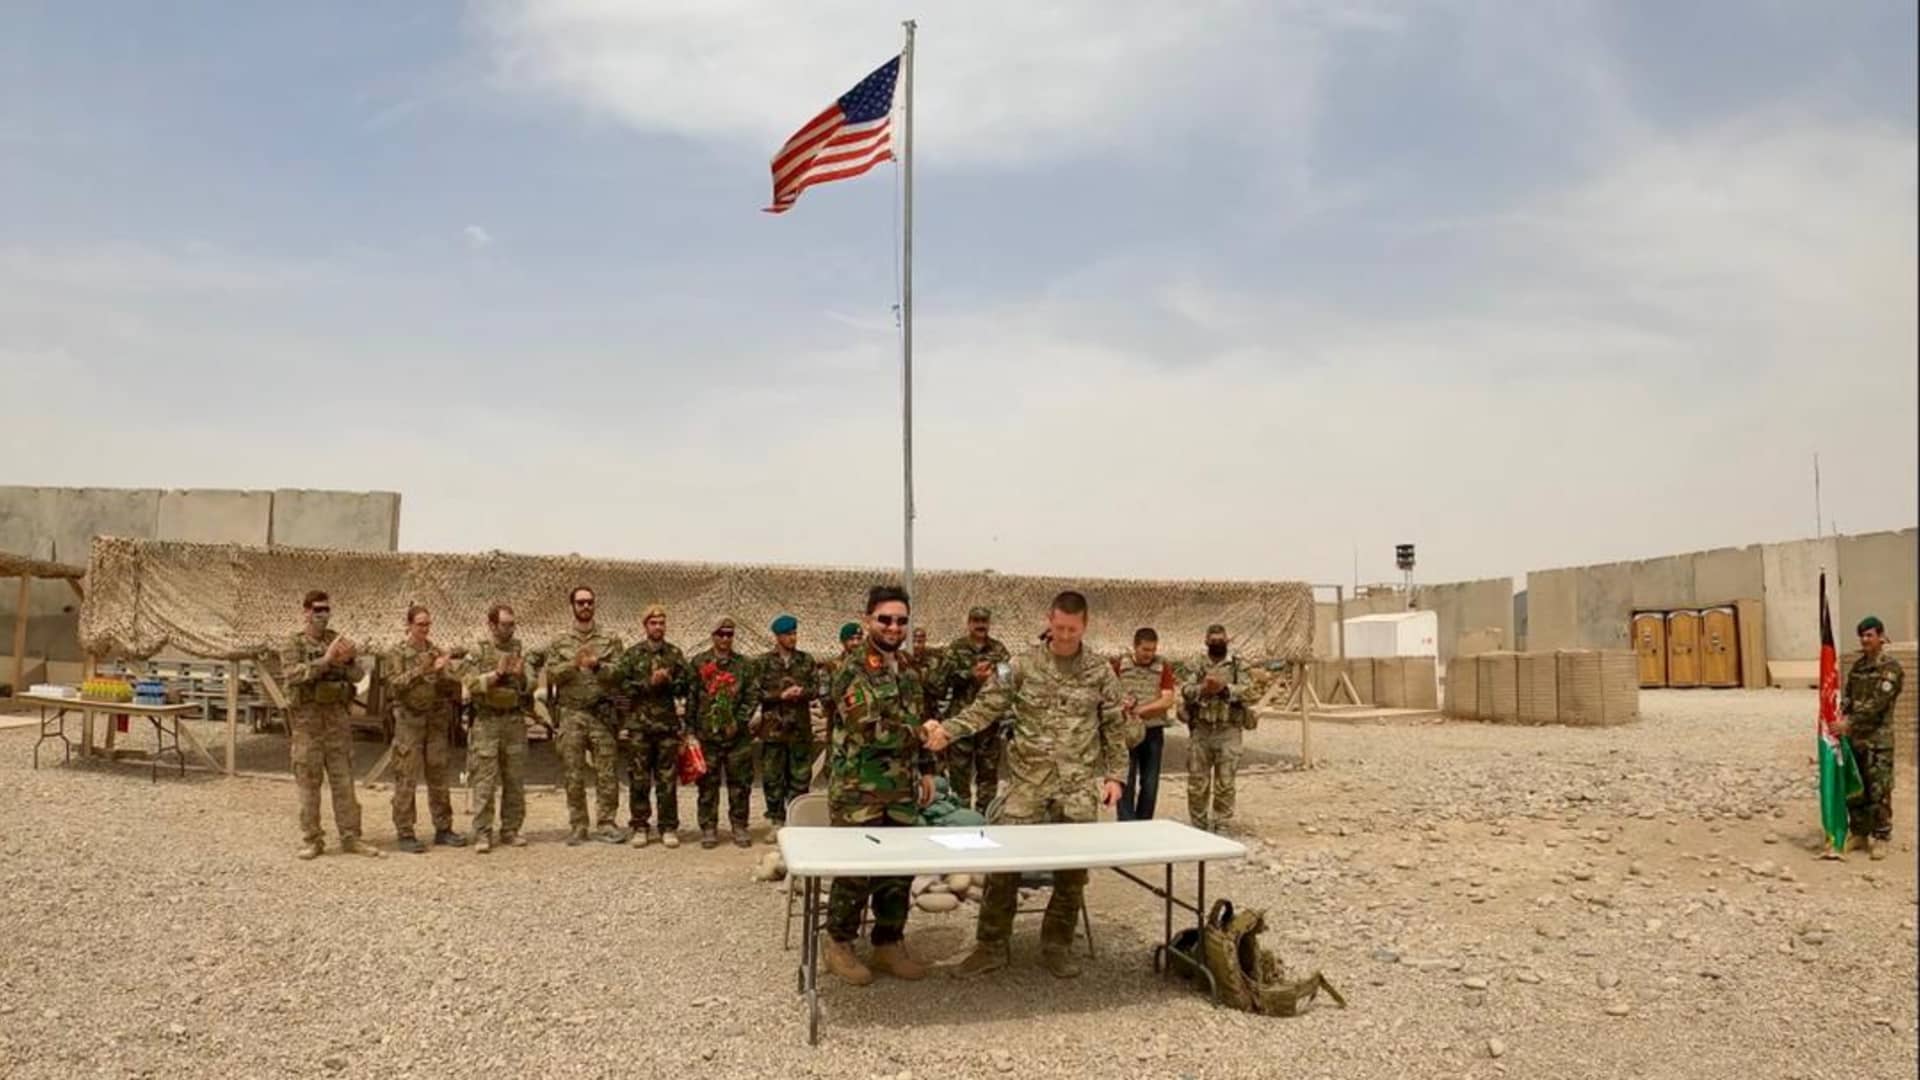 Handover ceremony at Camp Anthonic, from U.S. Army to Afghan Defense Forces in Helmand province, Afghanistan May 2, 2021.